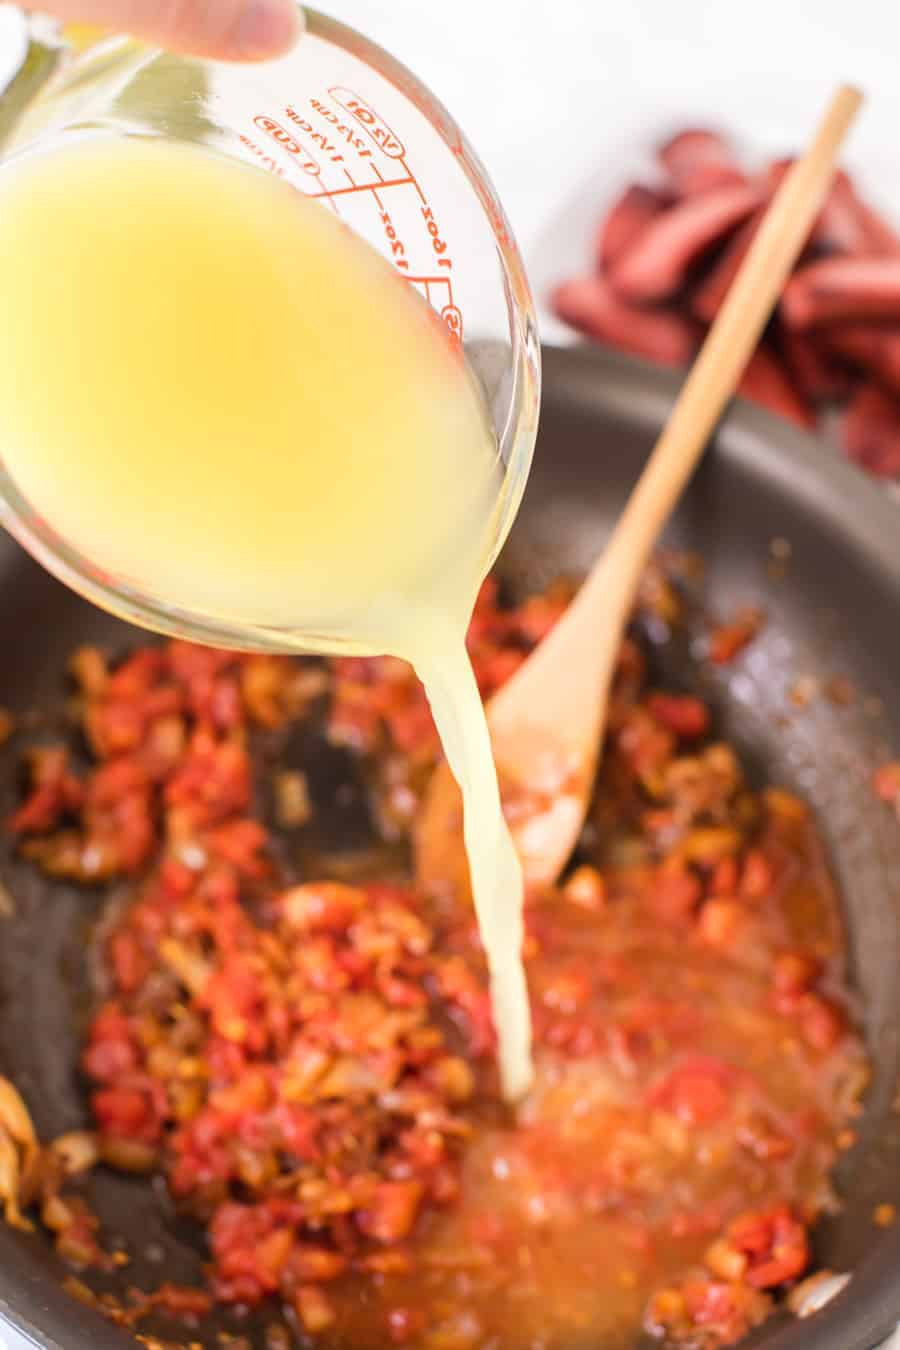 lentils and a tomato and spicy looking sauce in a pan.